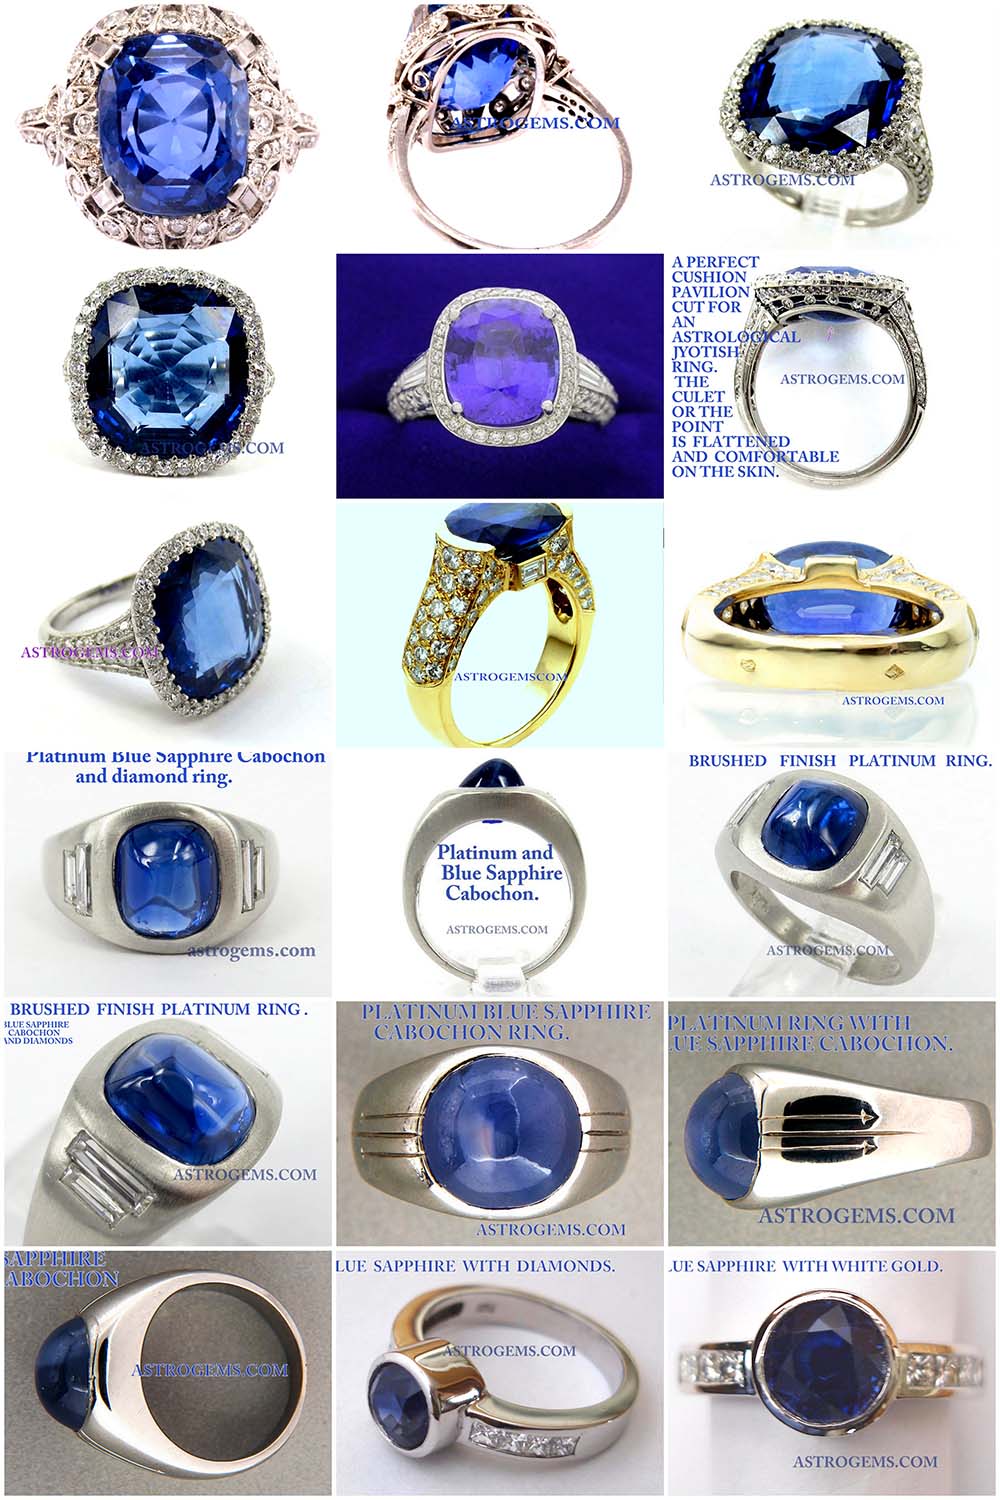 Astrogems makes a wide variety of blue sapphire rings. We can also create custom designs.